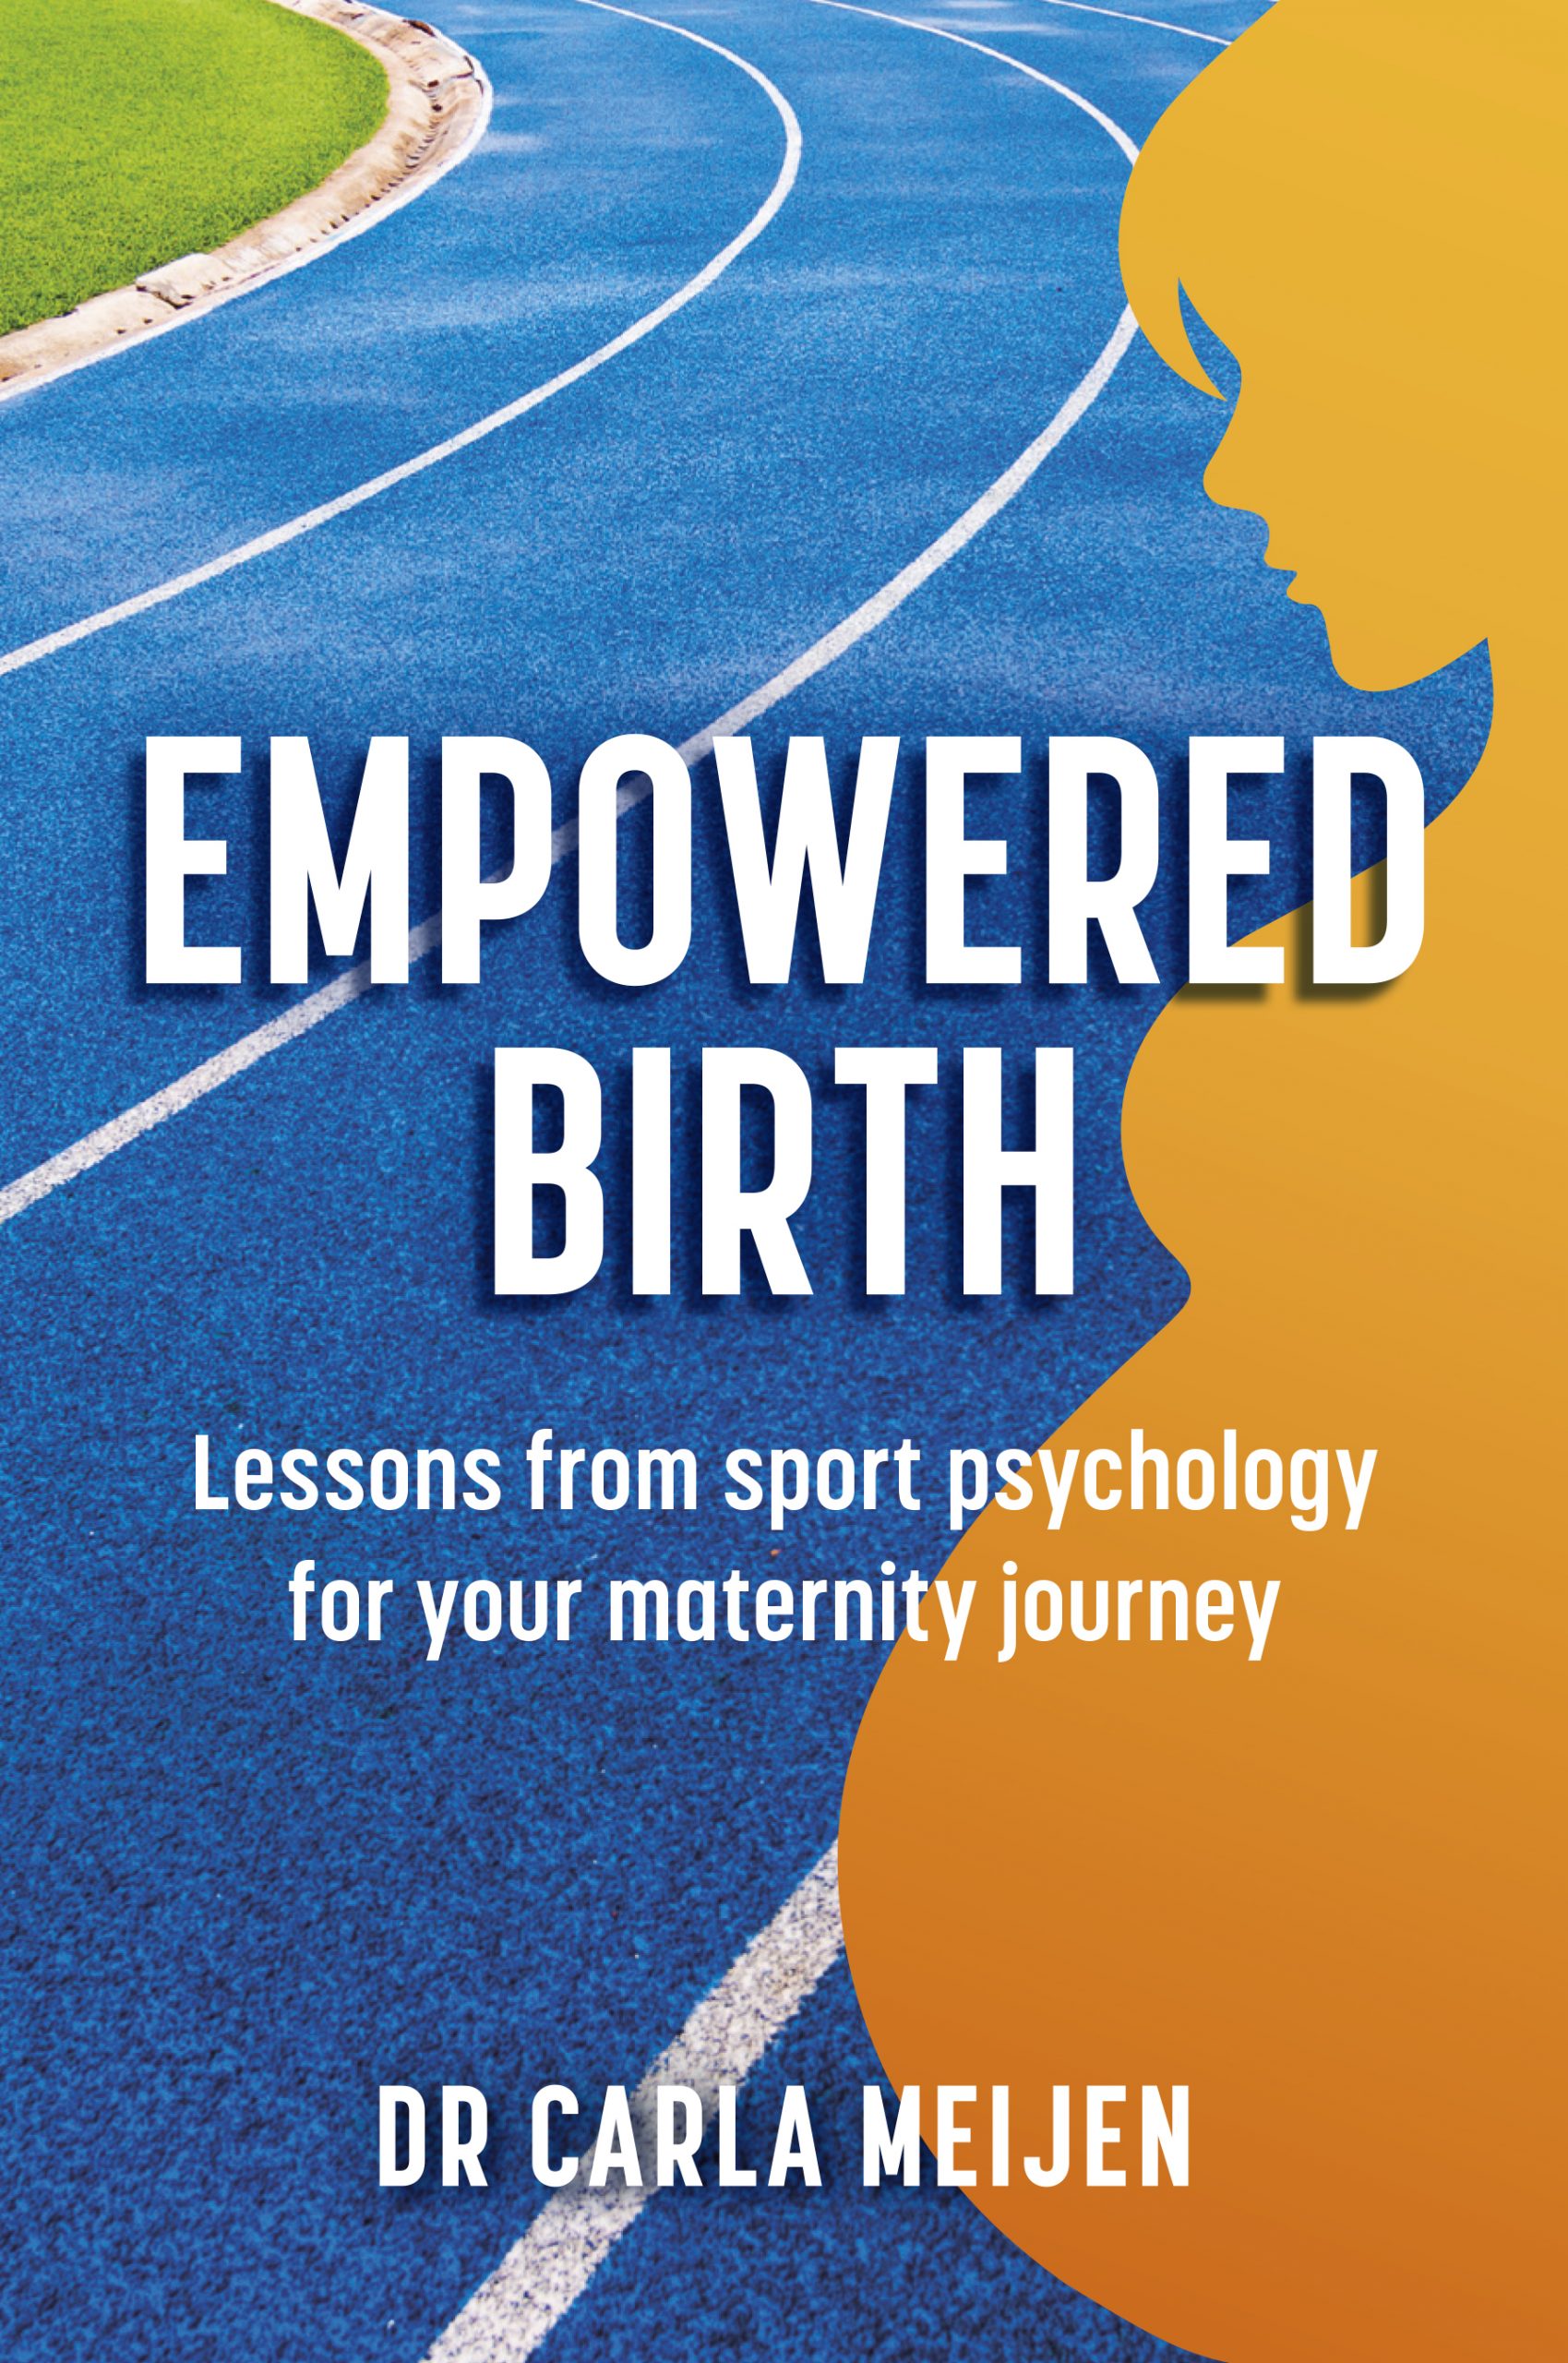 Empowered Birth: Lessons from Sport Psychology for your Maternity Journey